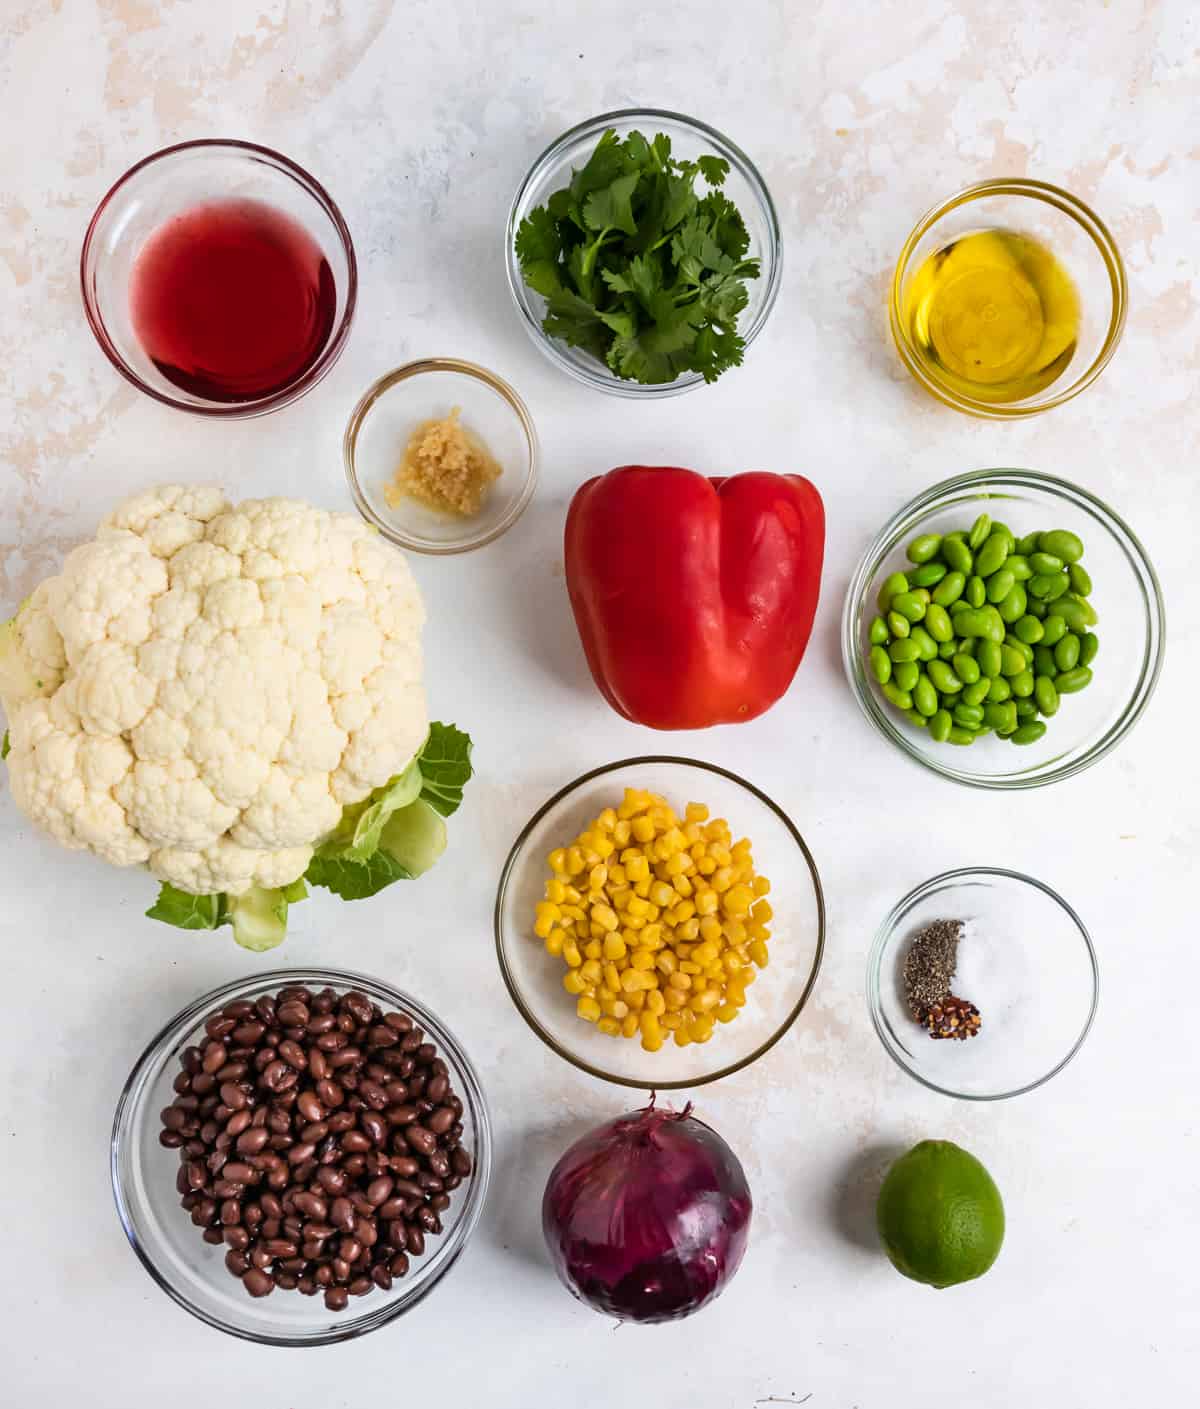 Cauliflower, corn, black beans, peppers, lime and other ingredients on counter.